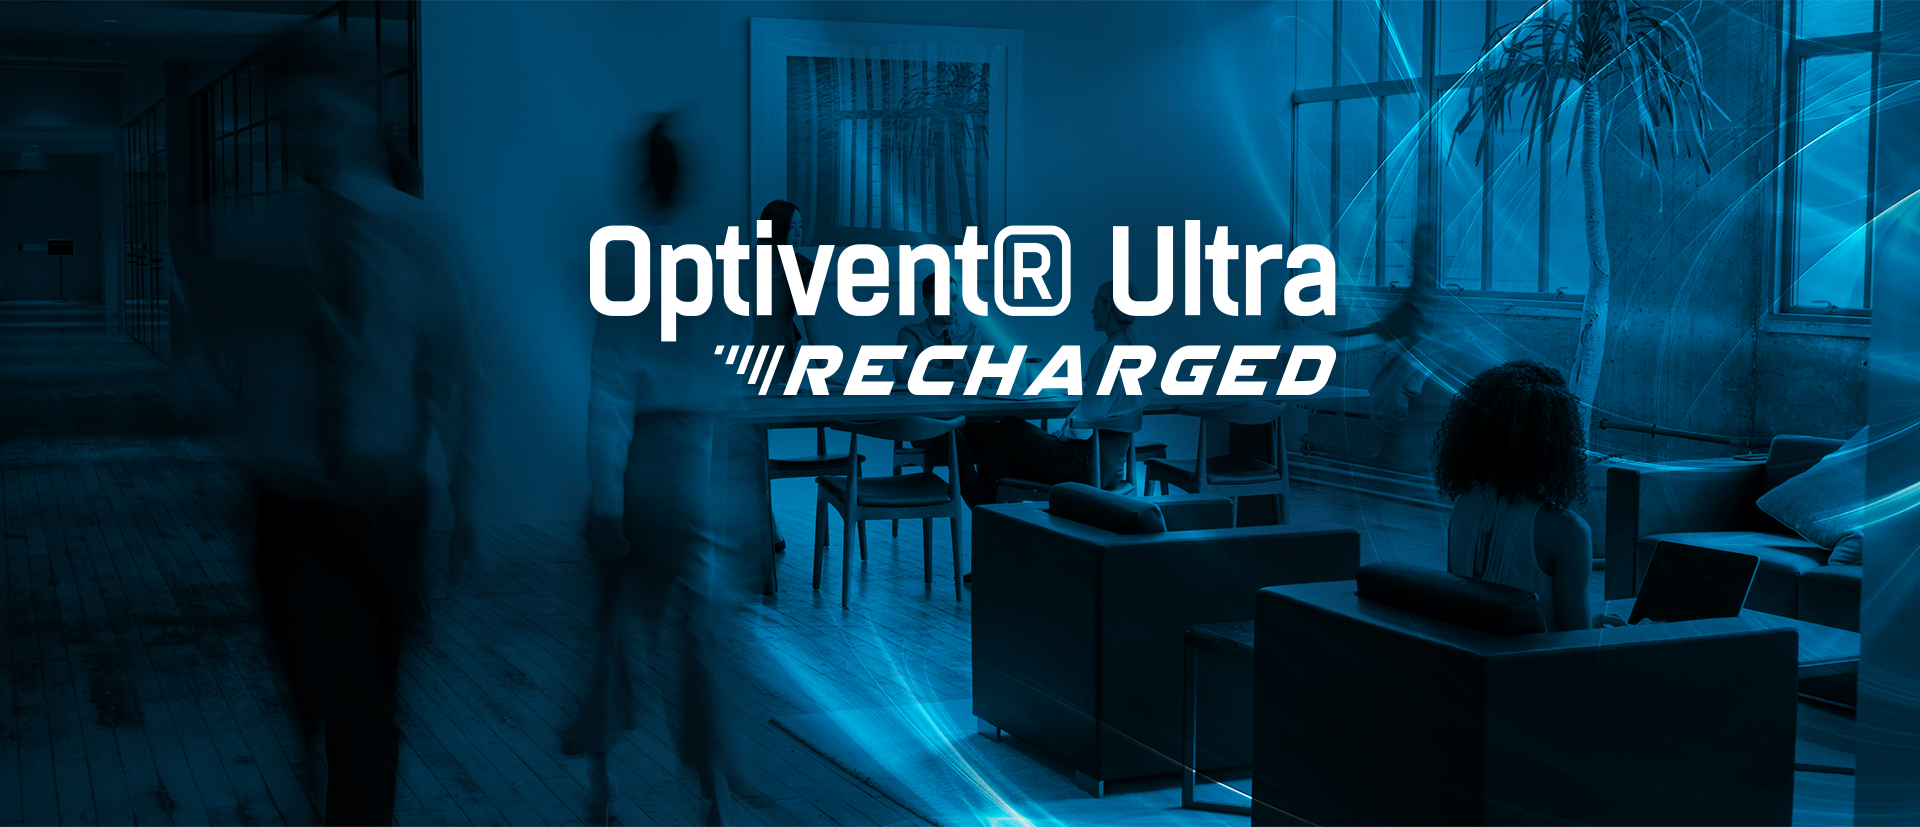 OPTIVENT® ULTRA RECHARGED